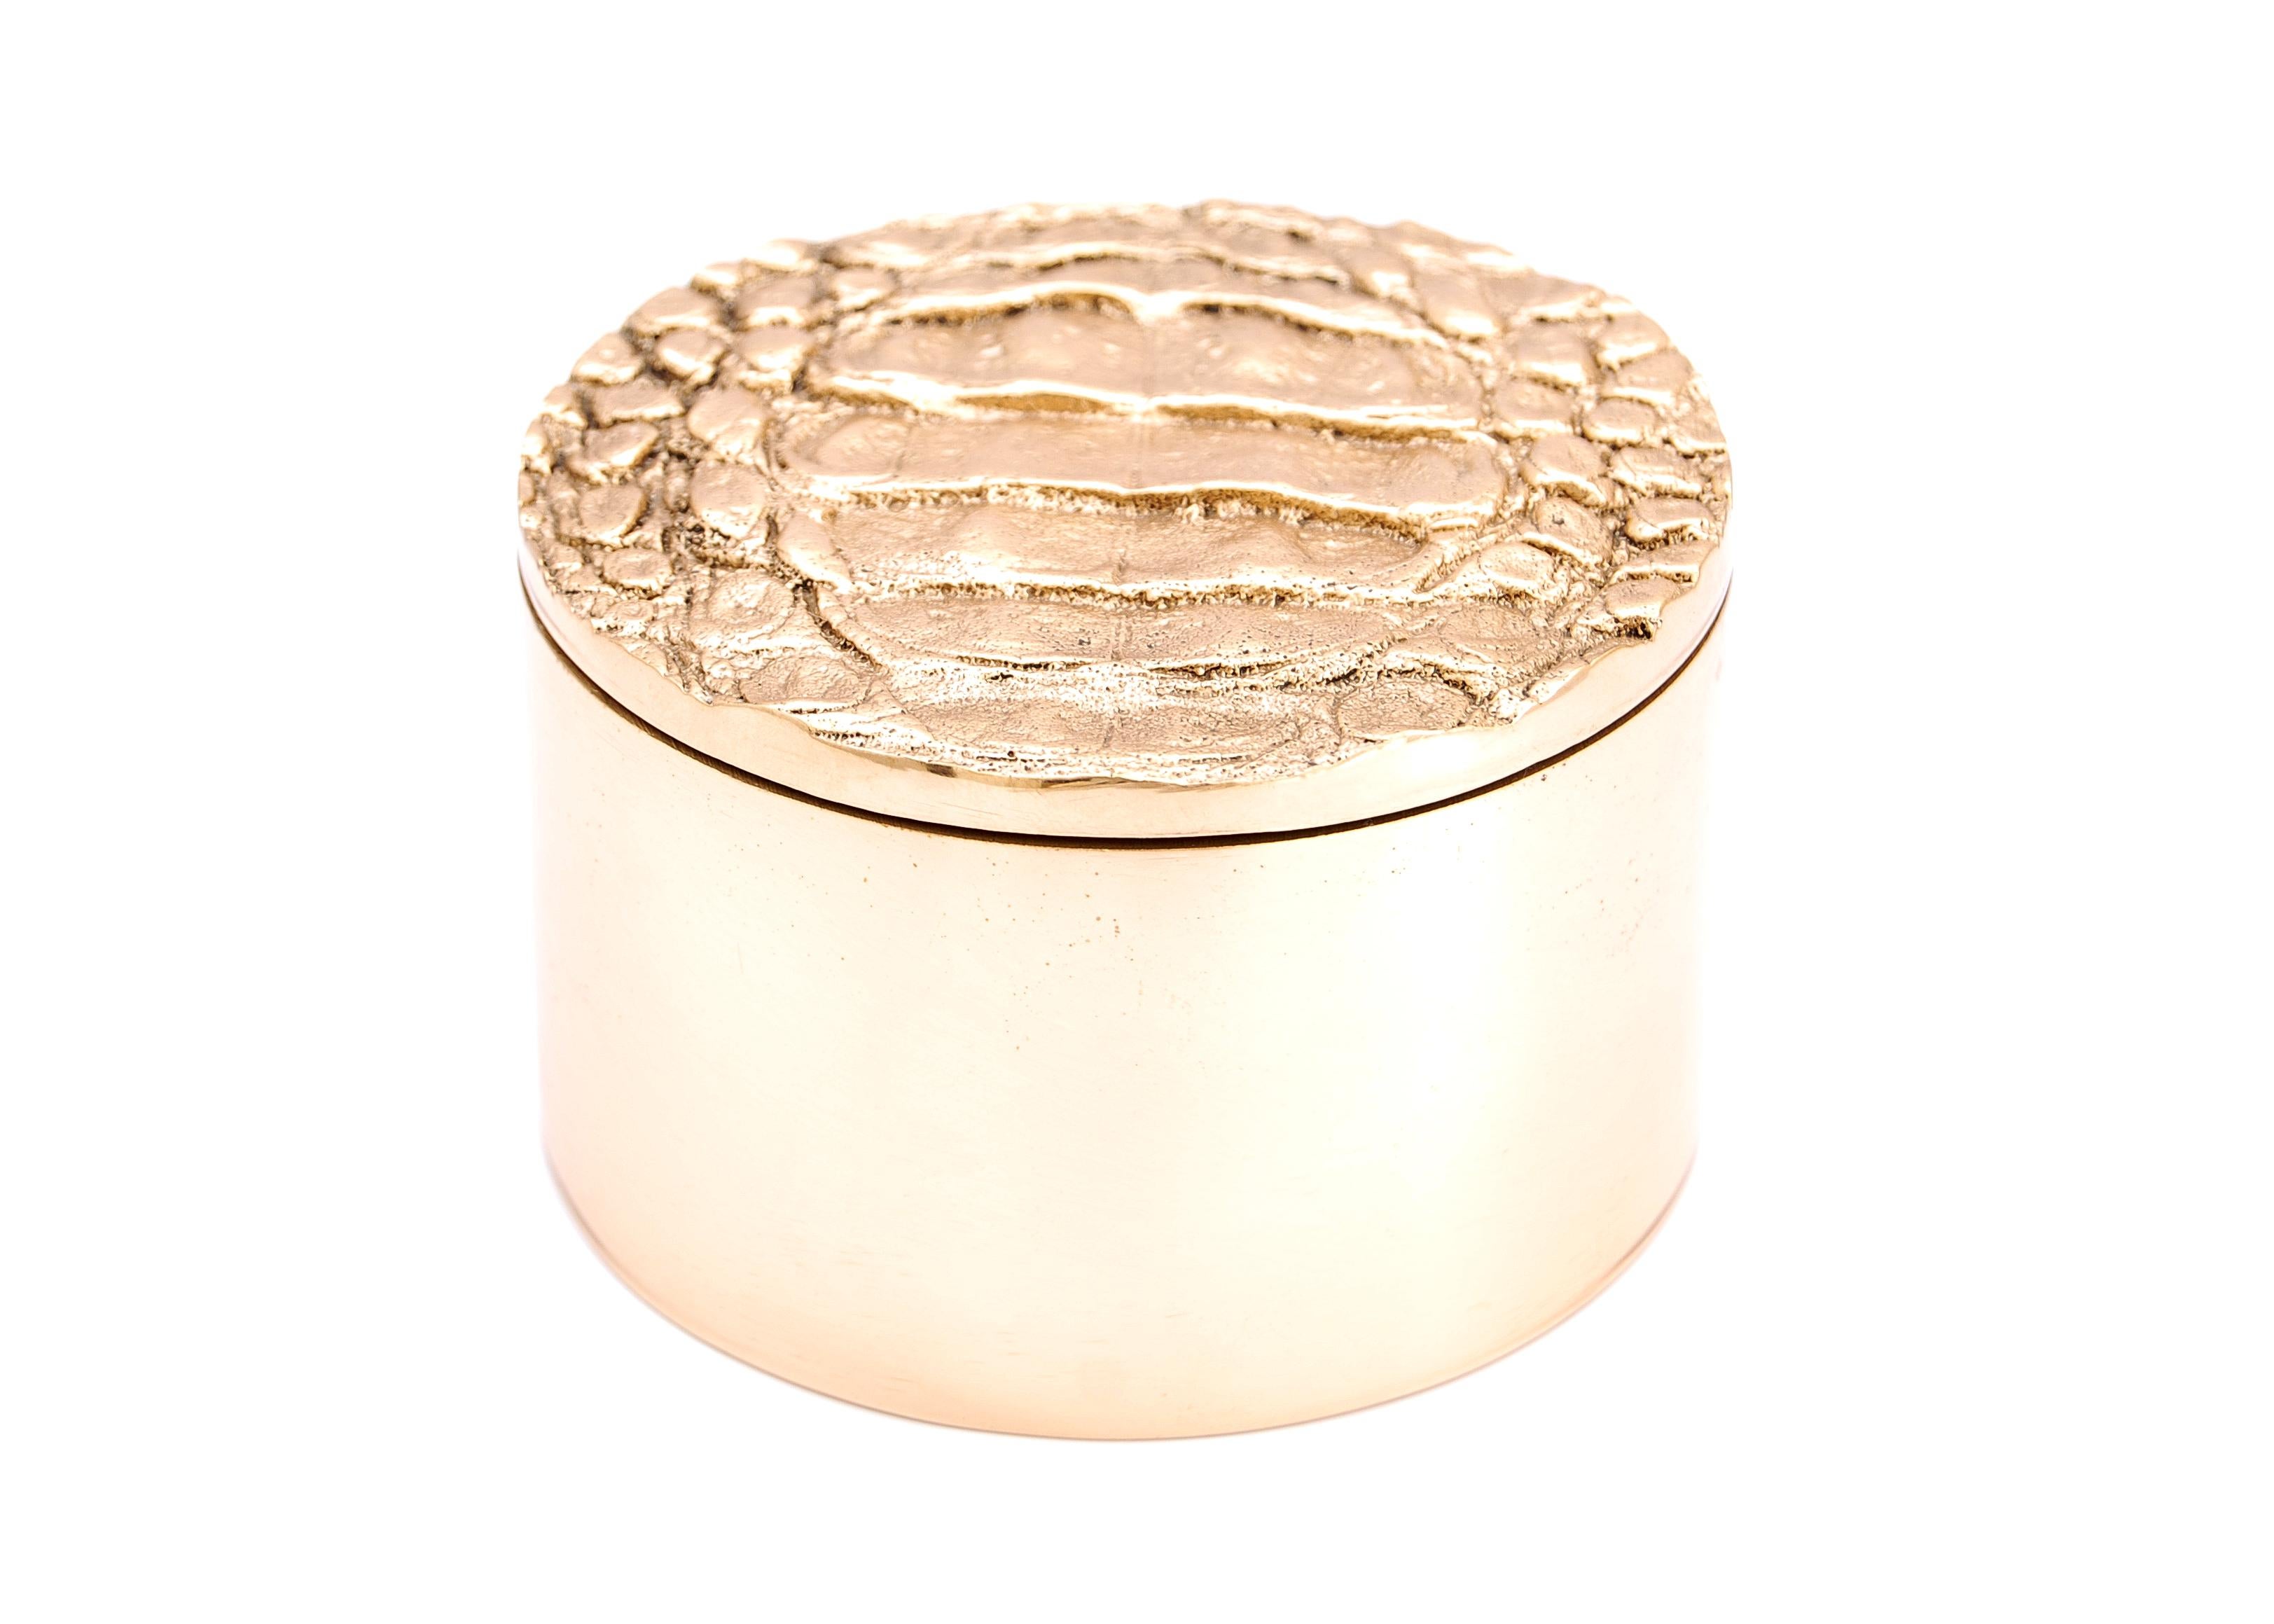 Mark small box by Fakasaka Design
Dimensions: W 10 cm D 10 cm H 6.5 cm.
Materials: polished bronze.
Also available in black/brown bronze. 

 FAKASAKA is a design company focused on production of high-end furniture, lighting, decorative objects,